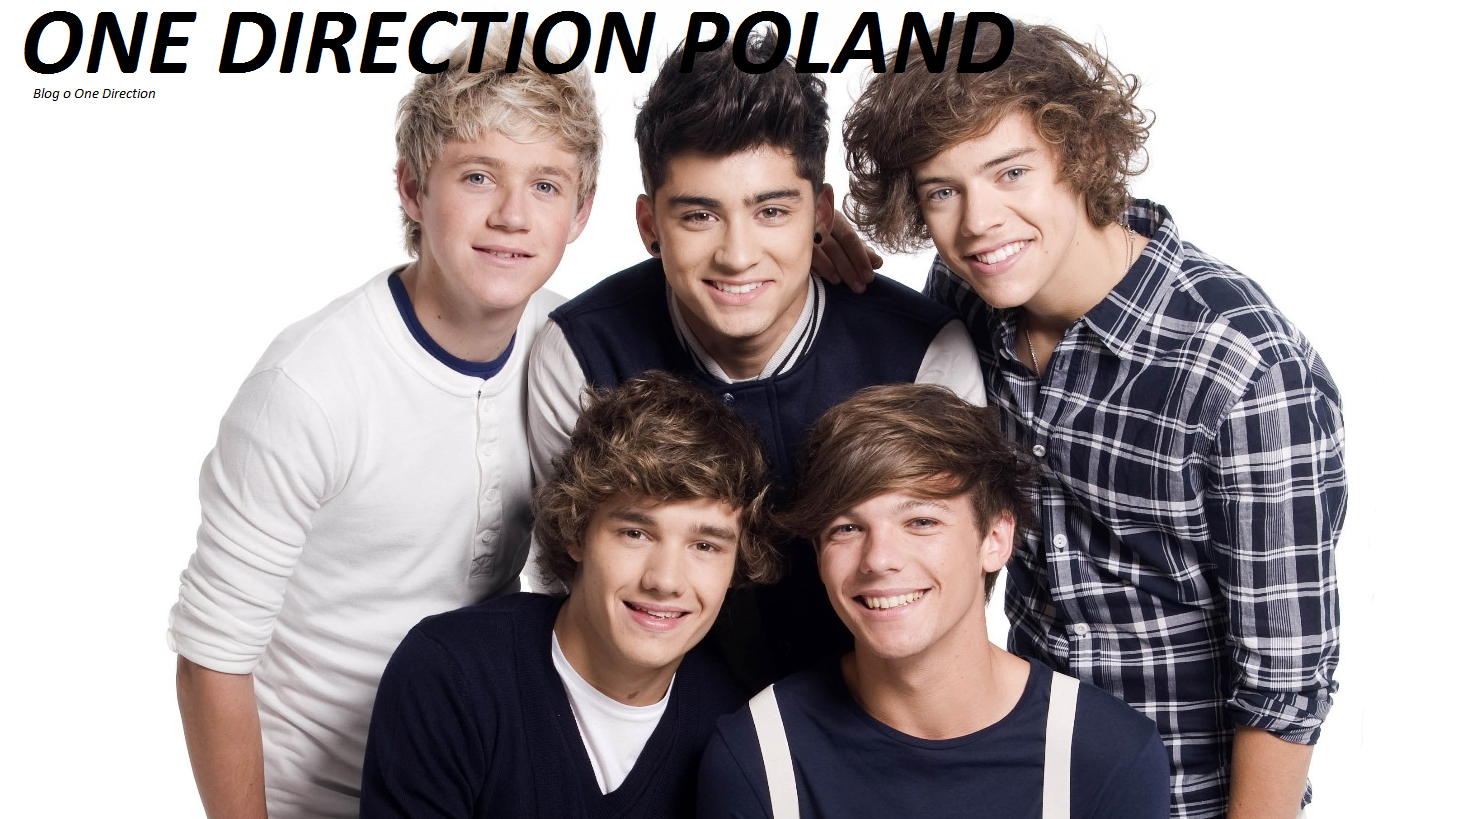 One Direction Poland